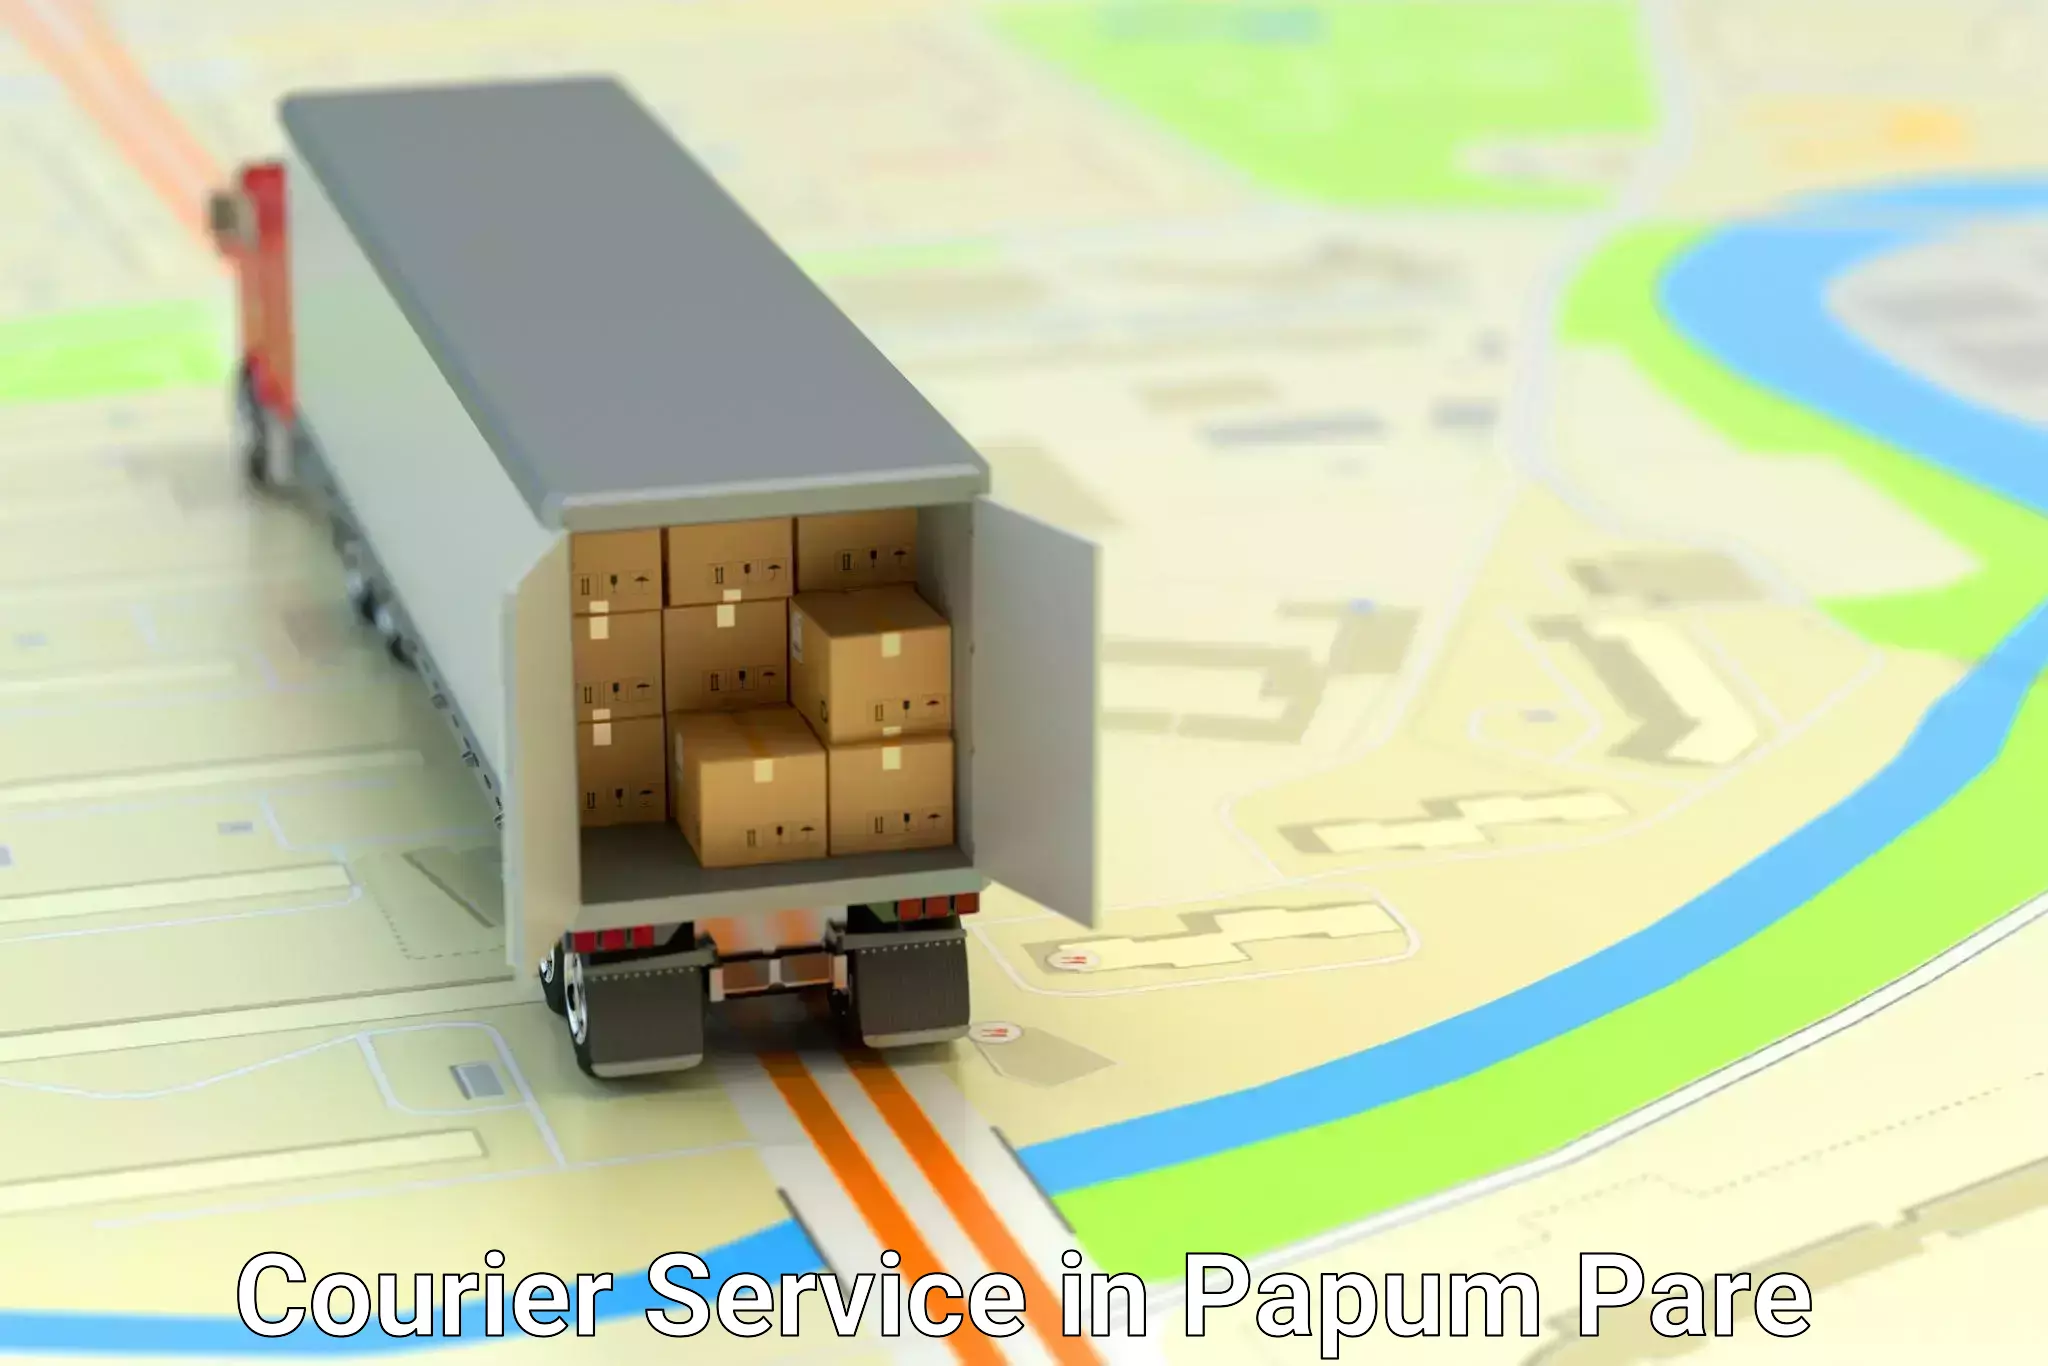 Flexible delivery schedules in Papum Pare